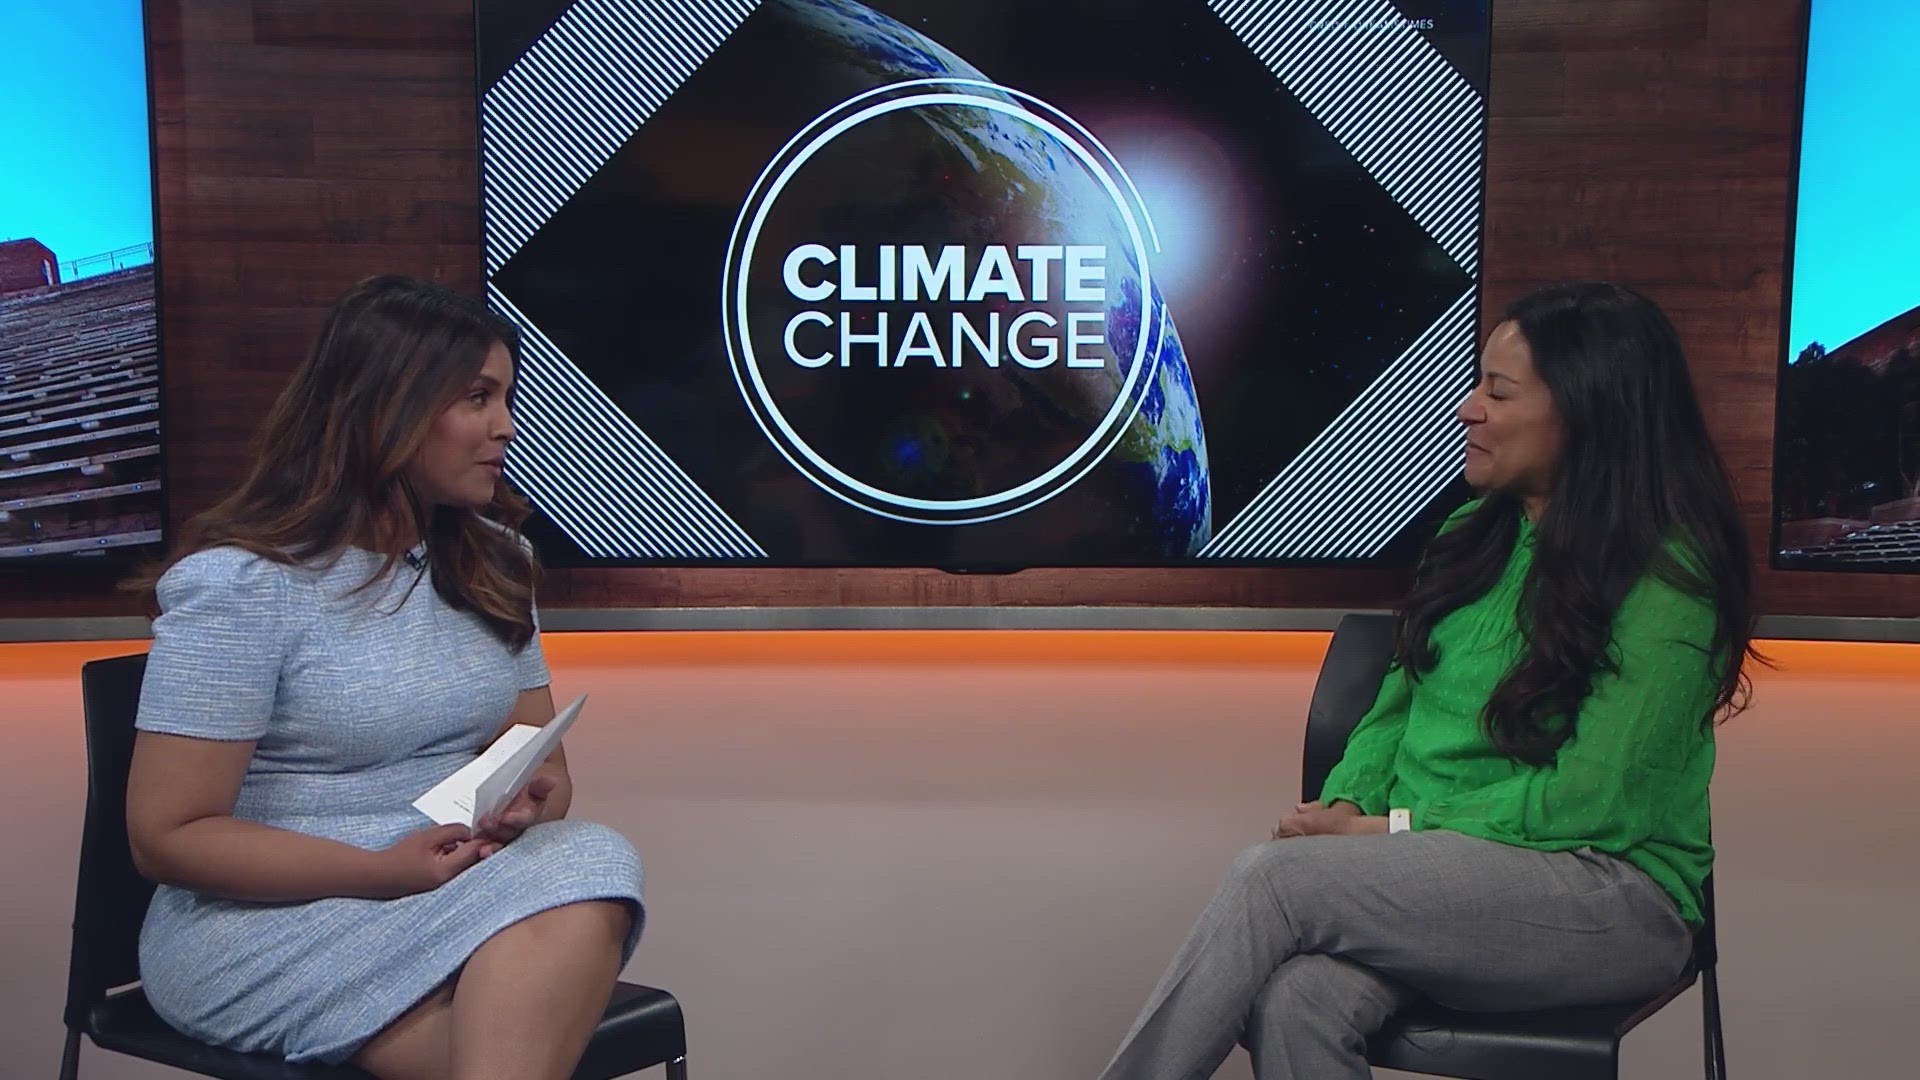 Parenting expert and therapist Dr. Sheryl Ziegler discusses a rise in youth climate anxiety and what parents can do to help.